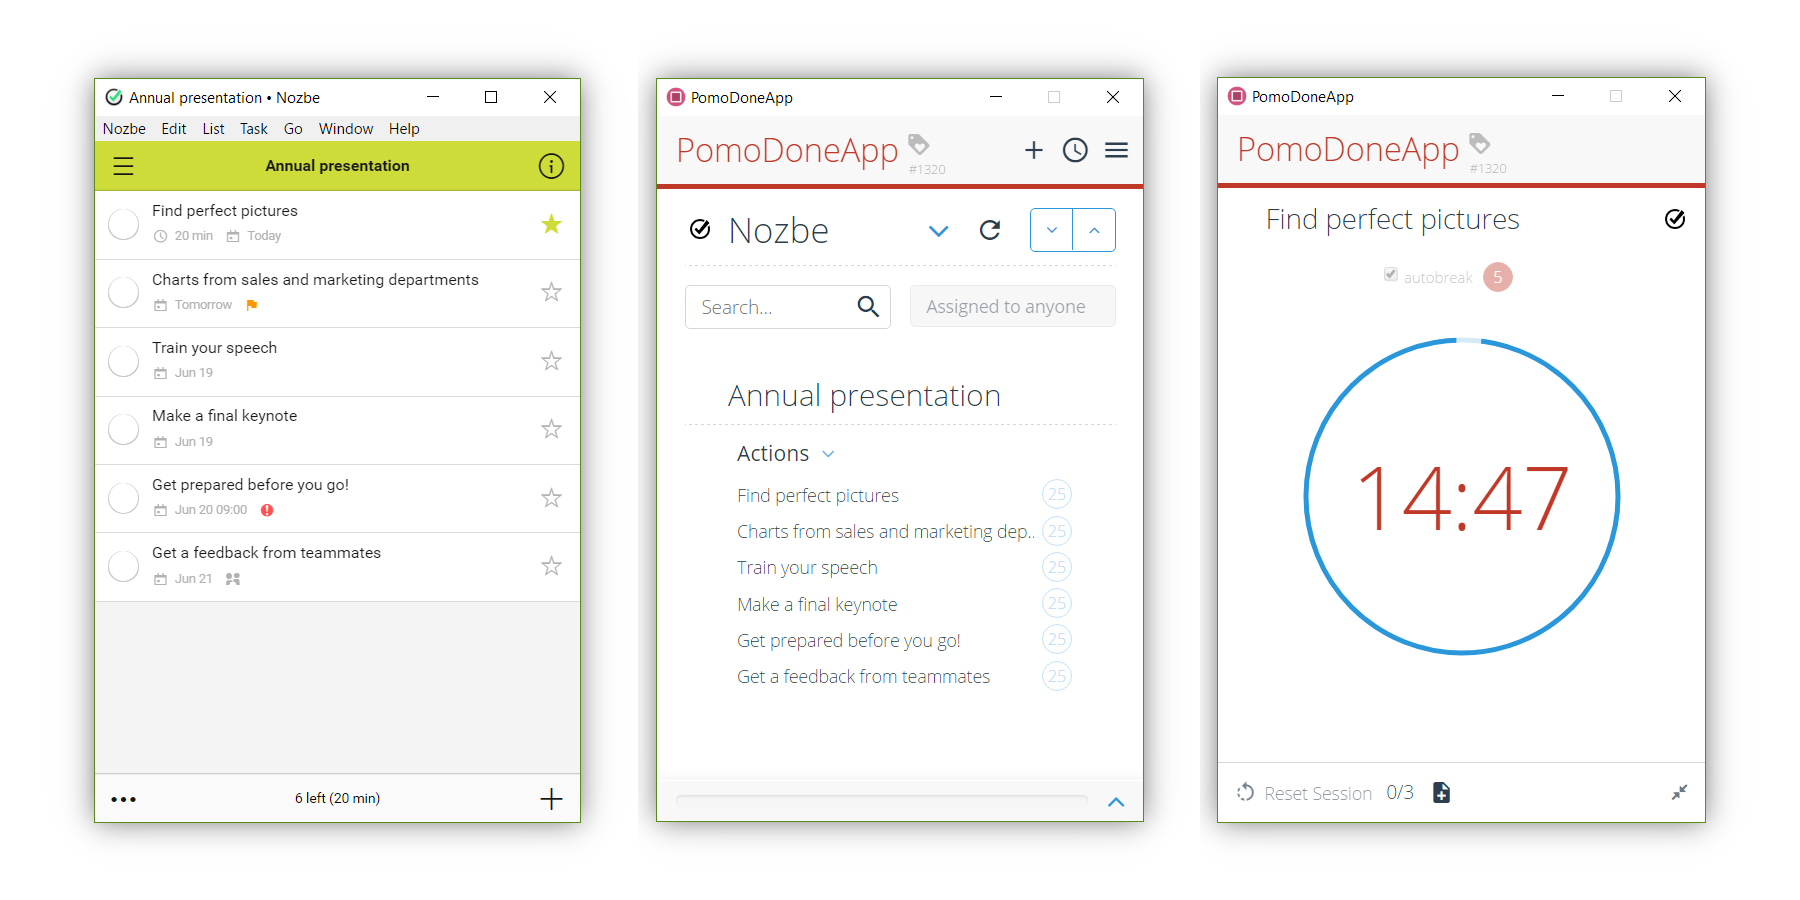 Both Nozbe and Pomodone are available as web-browser and standalone apps on multiple devices